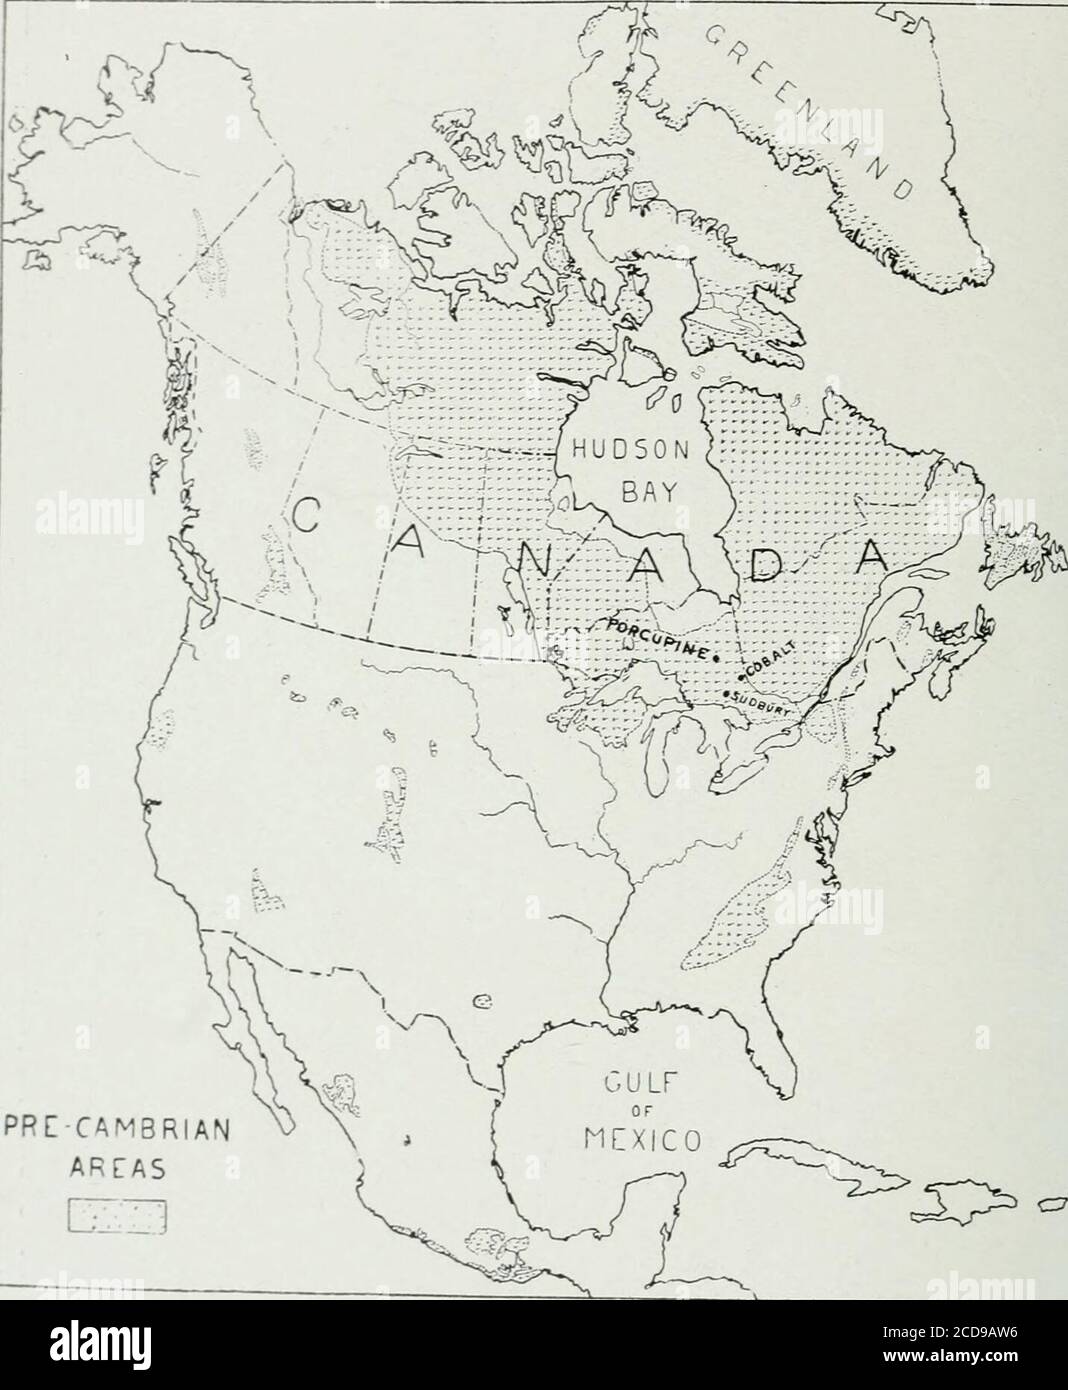 . Annual report . PRCCAMBRIANARETAS EH3 Pre-Cambrian of North America, showing situation of Cobalt. Cobalt=Nickel Arsenides and Silver (Cobalt and Adjacent Areas) By WILLET G. MILLER CHAPTER I Introduction The protaxis, or that rugged, rocky, pre-Cambrian region which stretches awayfrom the St. Lawrence river, expanding to the northwestward, and occupying a largepart of northern Ontario, has produced, and is constantly producing, a group of whatmay be called unique, or at least comparatively rare, economic minerals. Probably asgreat a variety of minerals is produced here in proportion to the n Stock Photo